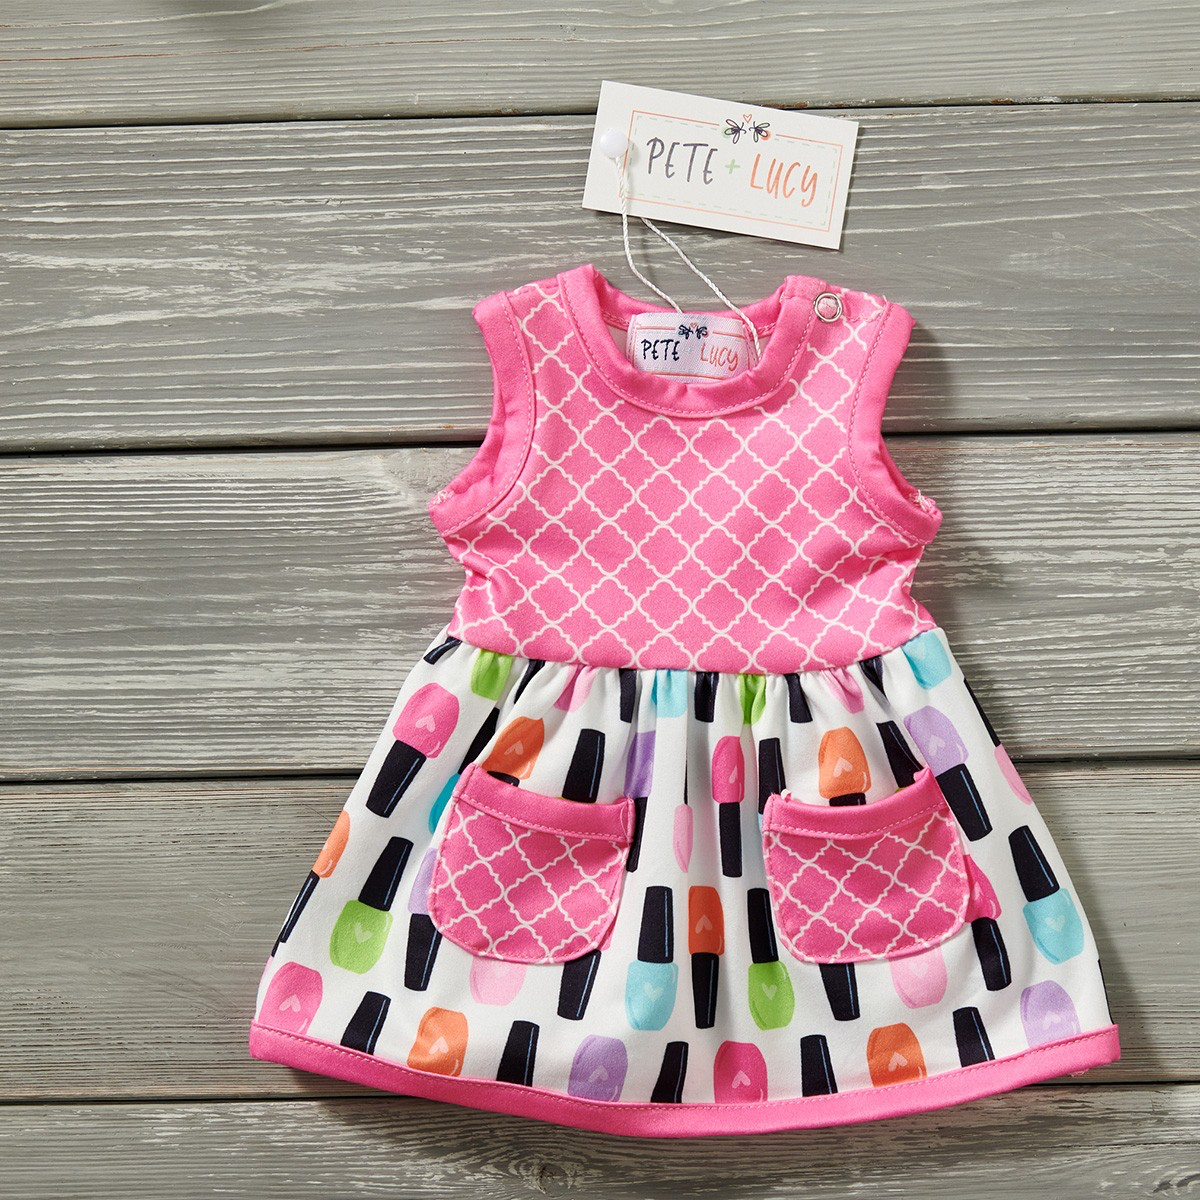 Neon Nail Polish Dolly Dress by Pete and Lucy